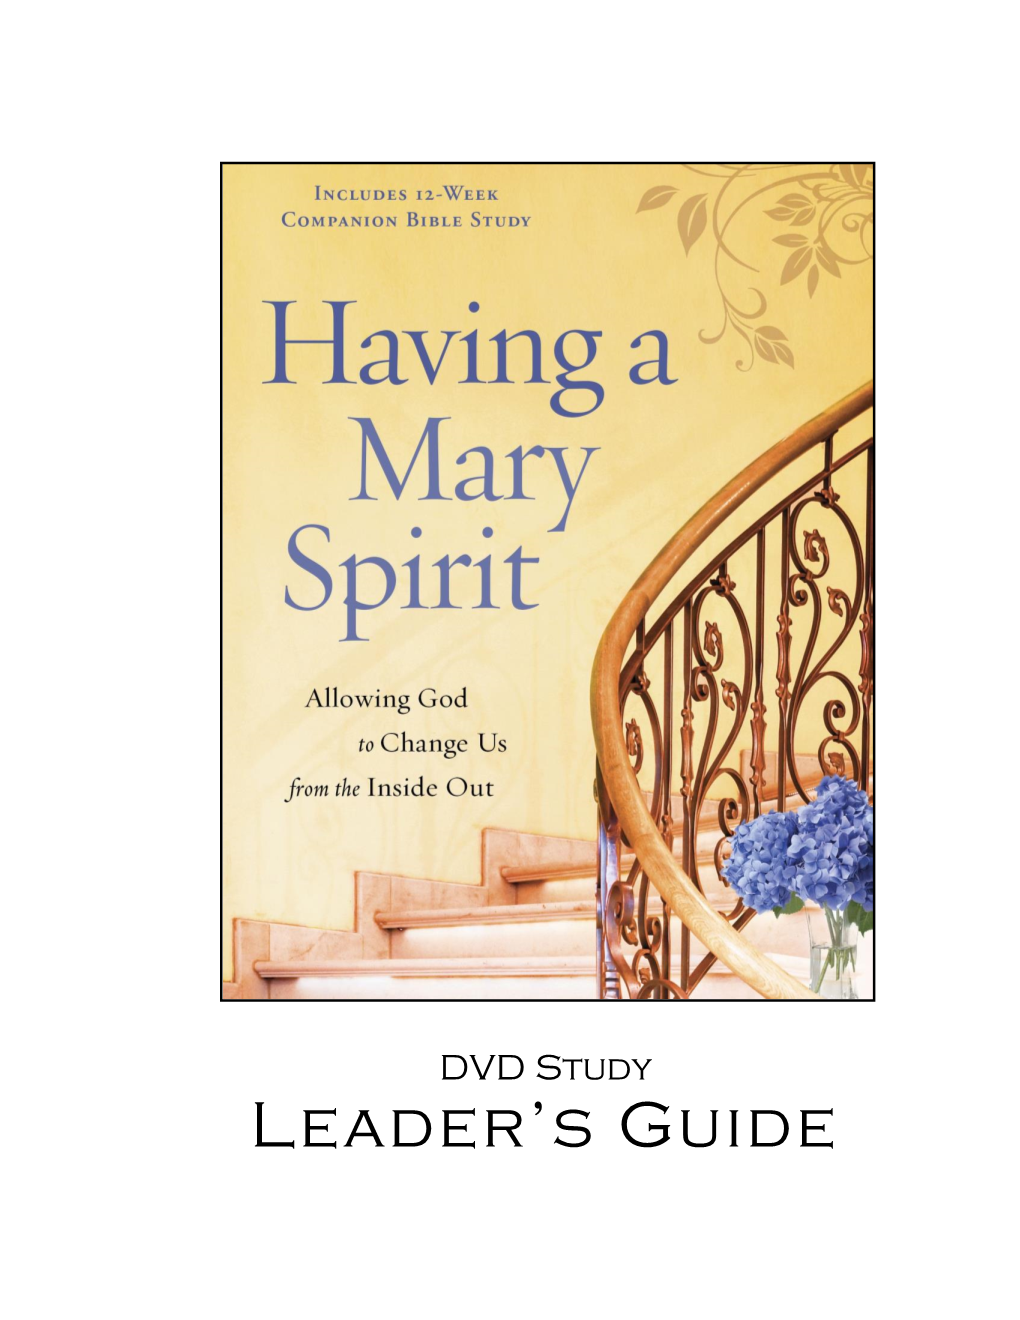 A Bible Study Leader's Guide